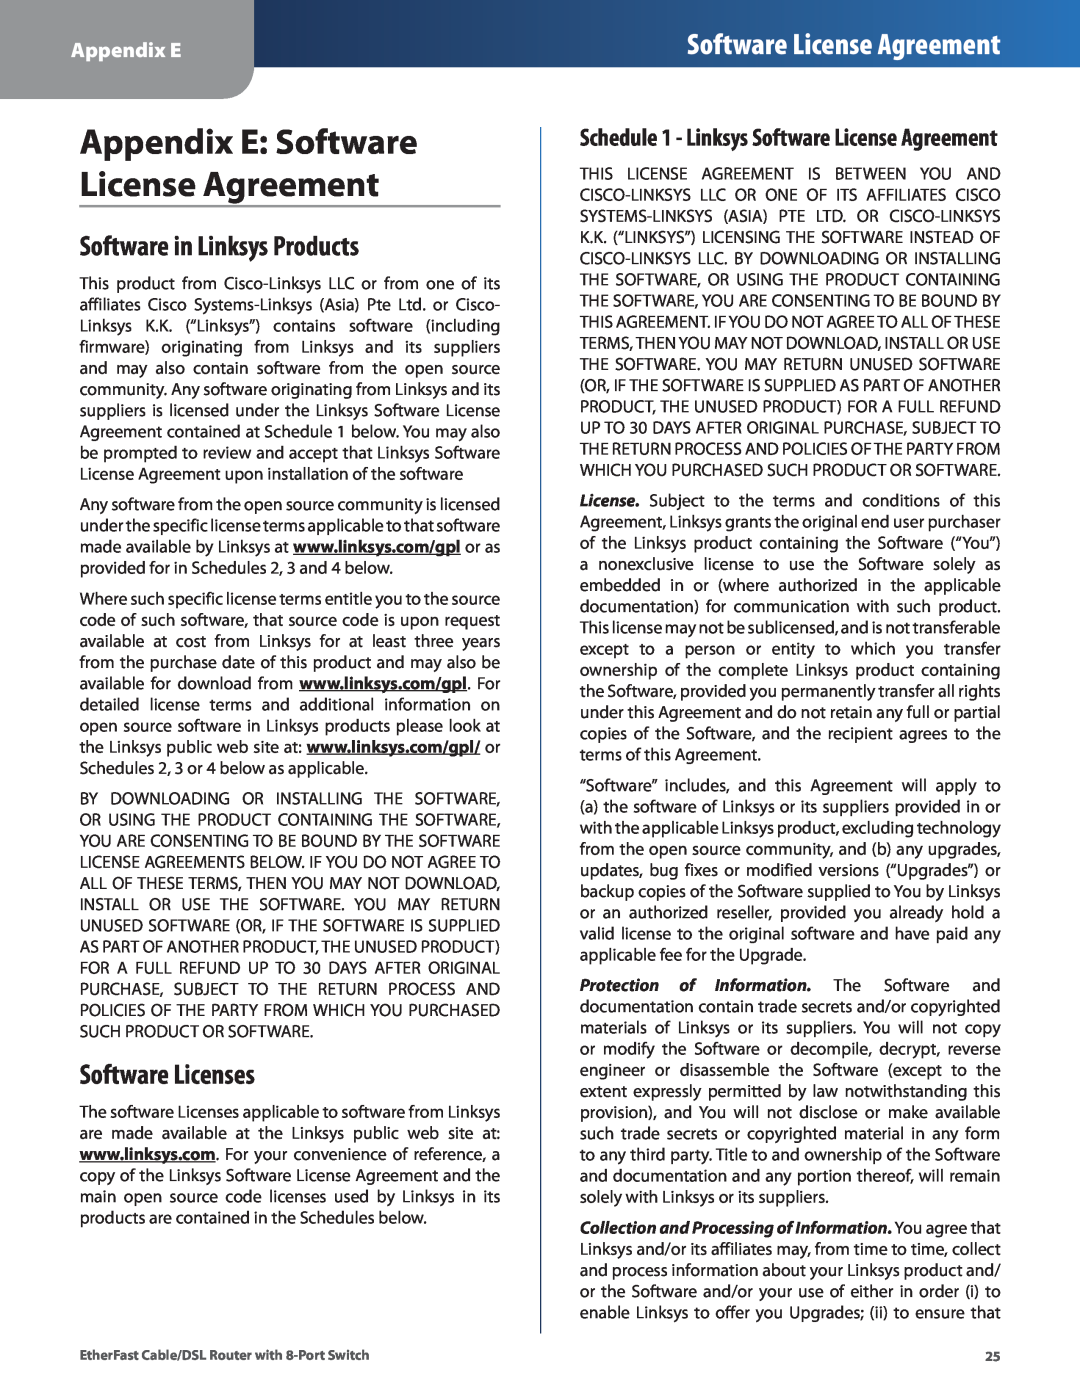 Cisco Systems BEFSR81 manual Appendix E Software License Agreement, Software in Linksys Products, Software Licenses 